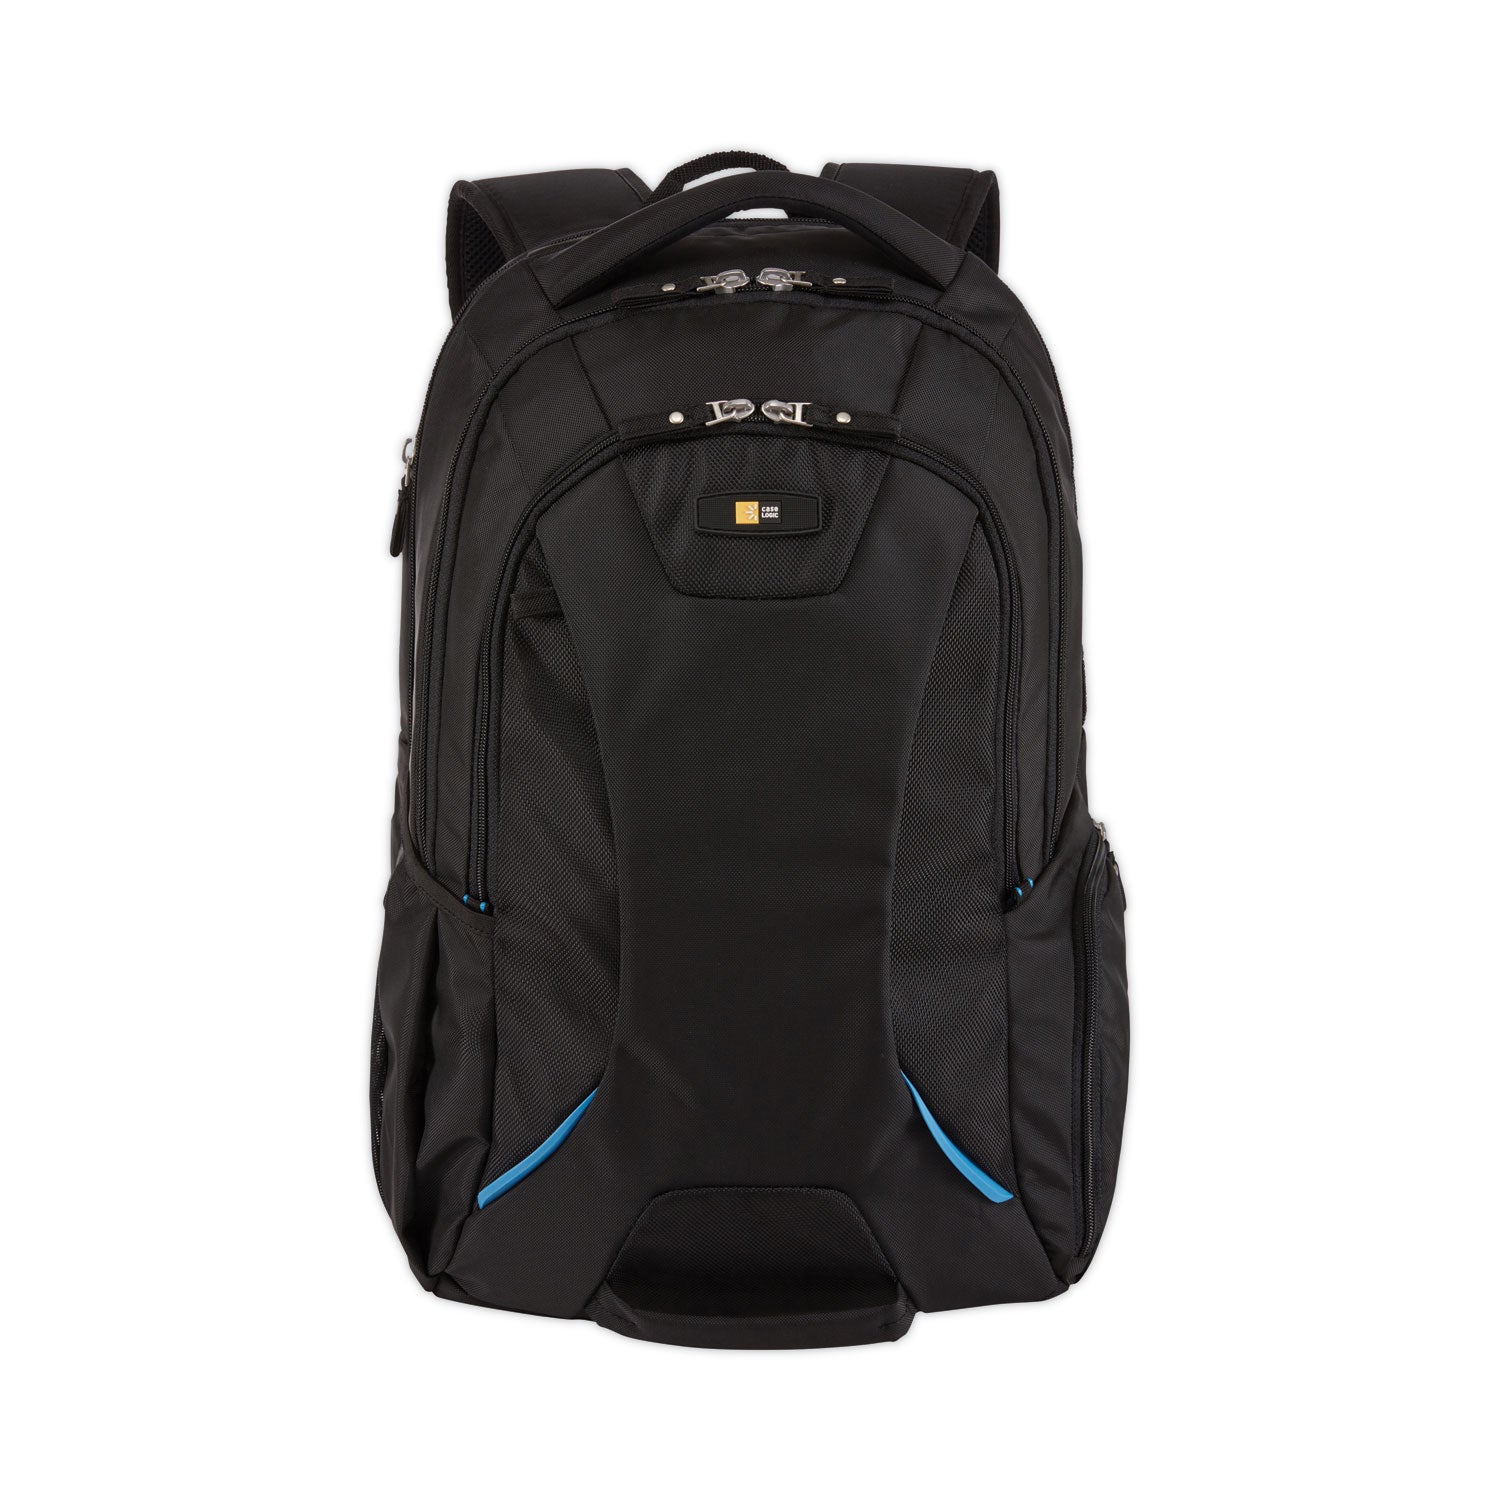 checkpoint-friendly-backpack-fits-devices-up-to-156-polyester-276-x-1339-x-1969-black_clg3203772 - 1